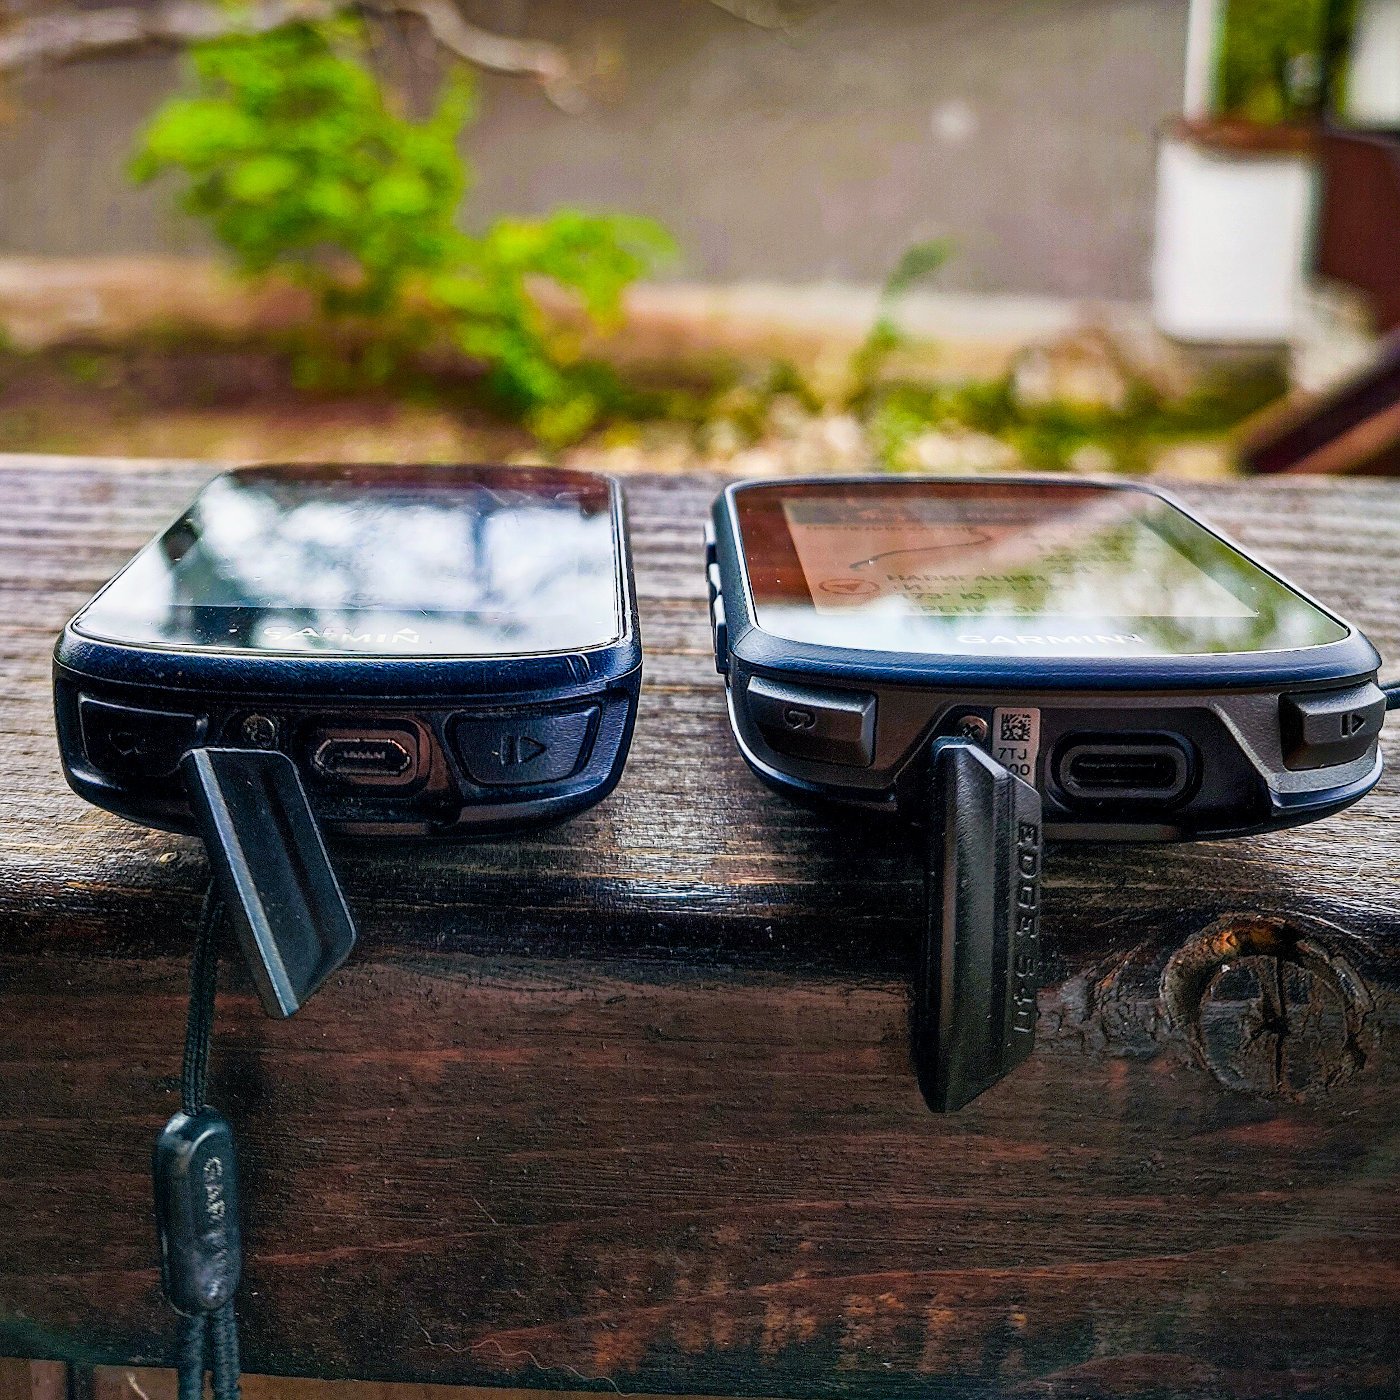 Garmin Edge 840 vs 530: Is Now The Time To Upgrade To Touchscreen? -  Sportive Cyclist